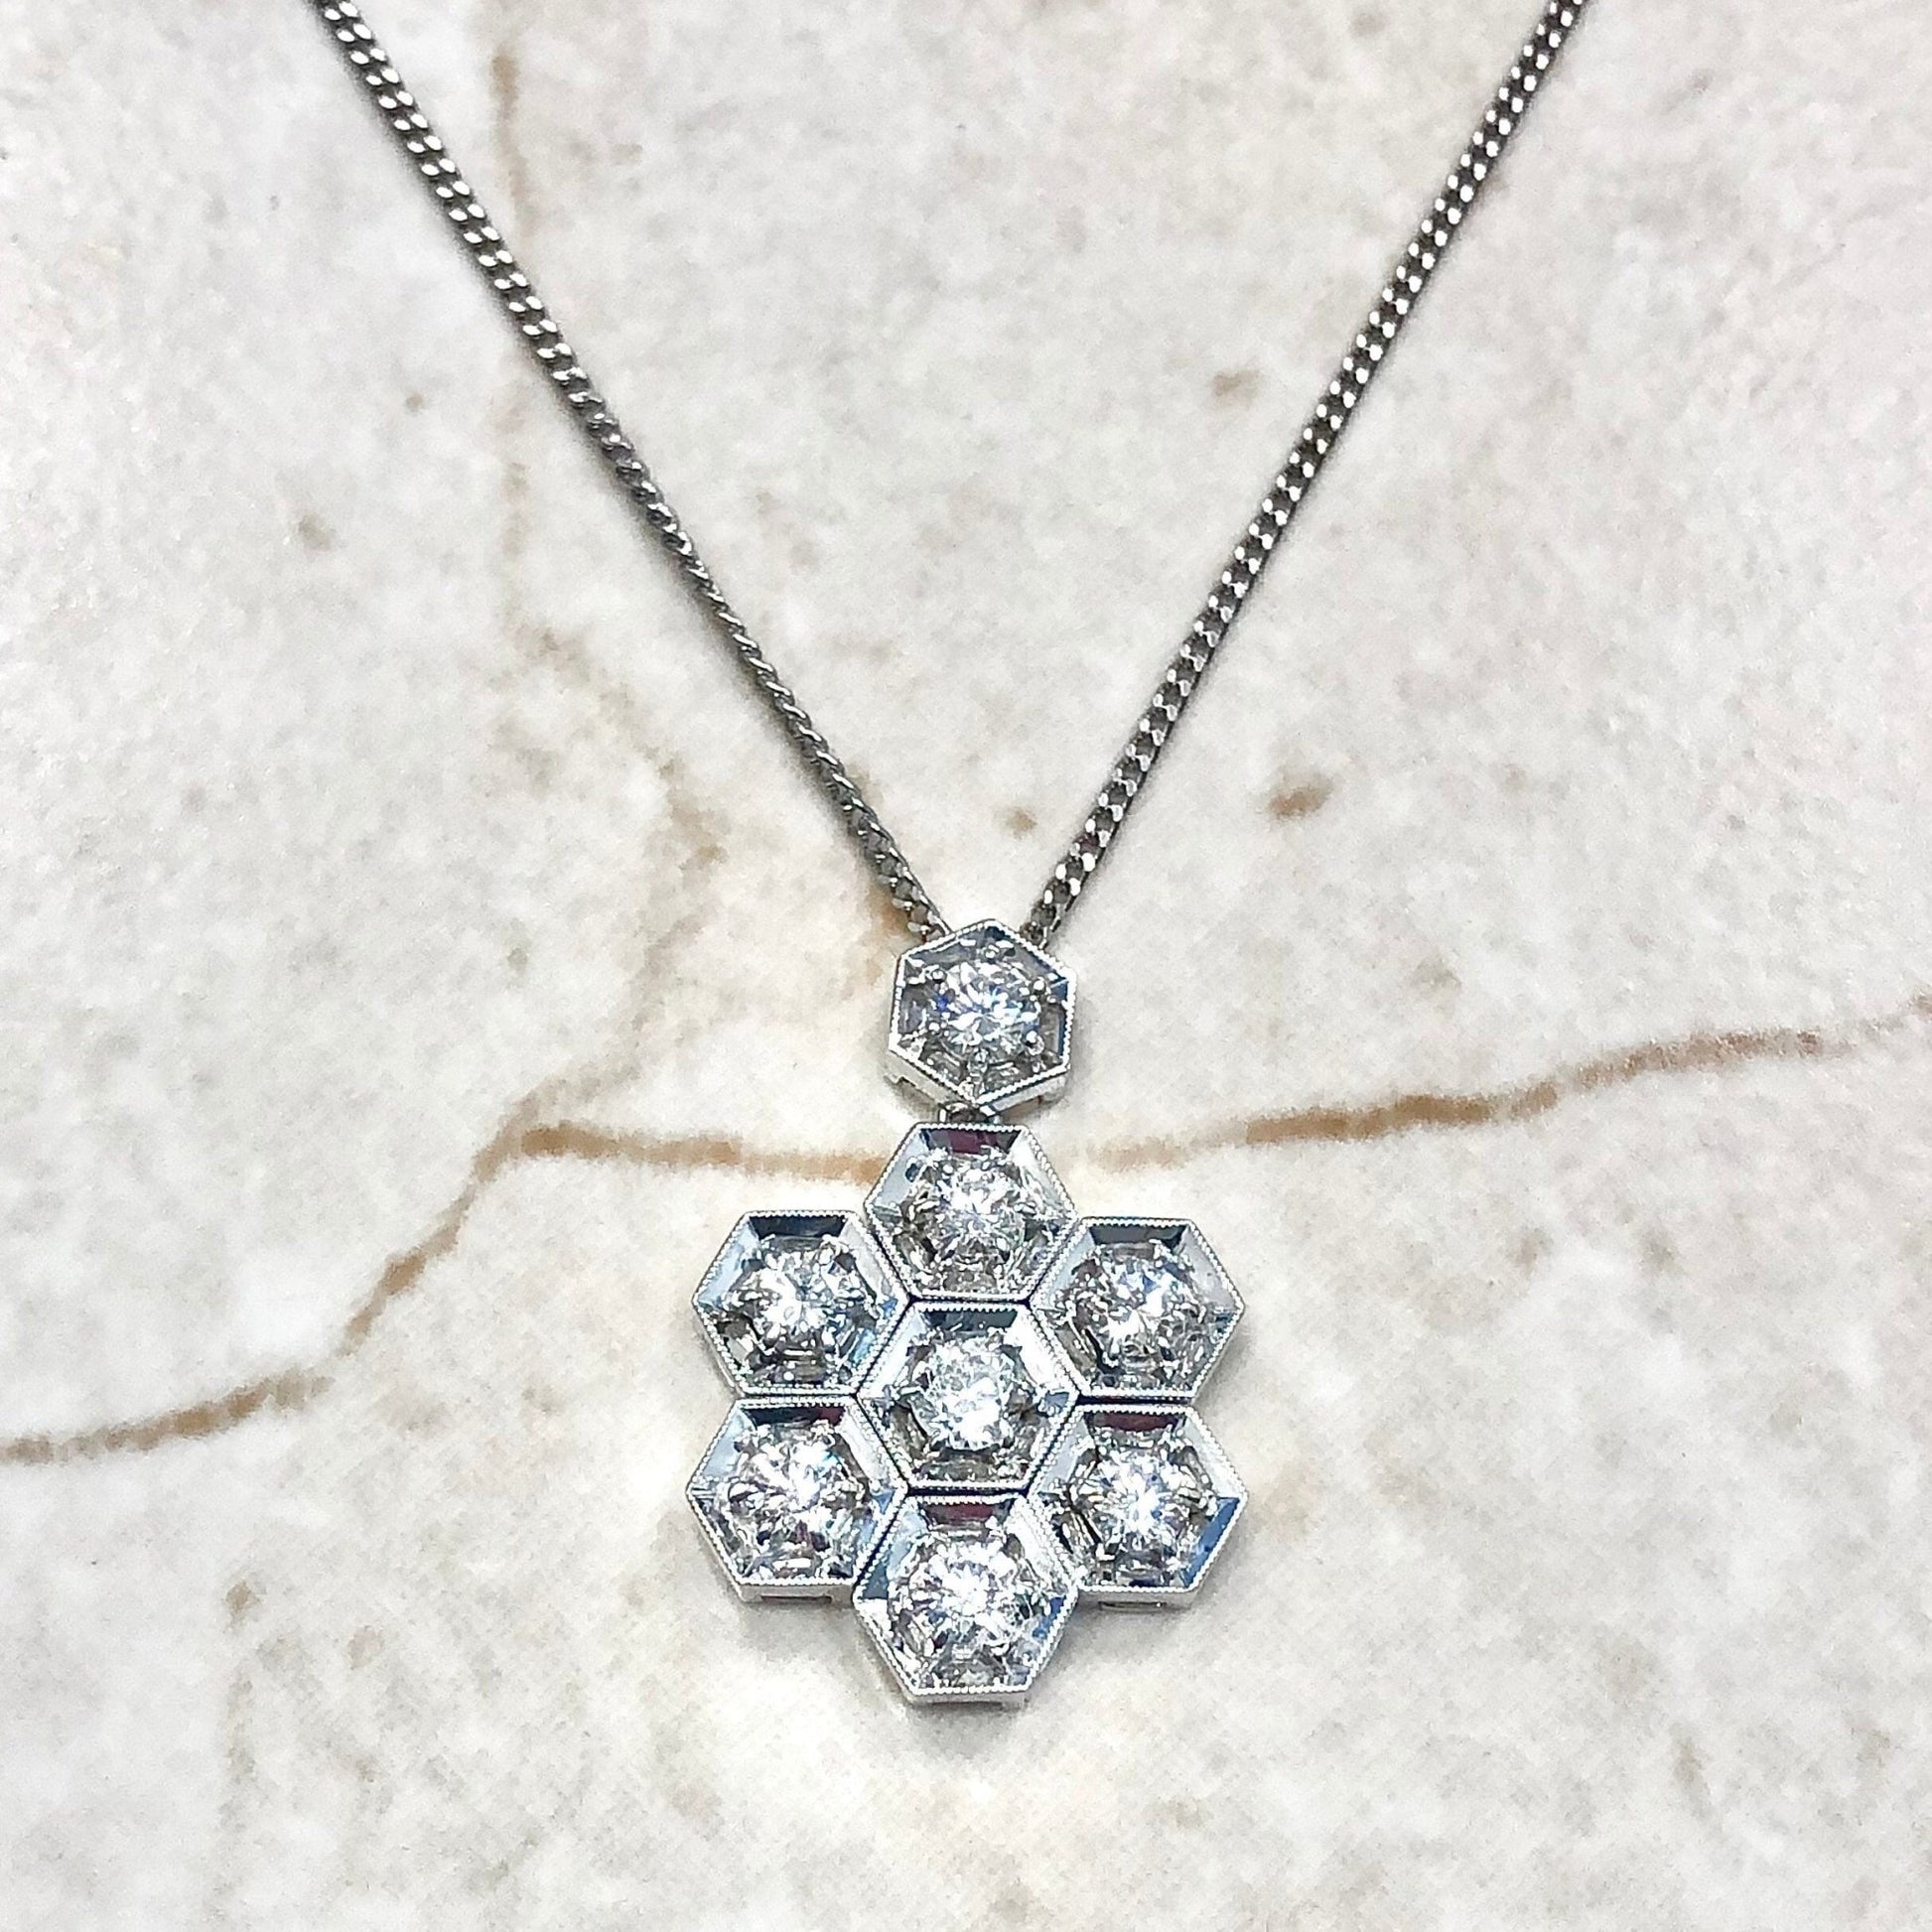 Handcrafted 18K Diamond Snowflake Pendant Necklace By Carvin French - 18K White Gold Snowflake Necklace - Diamond Necklace - Diamond Pendant